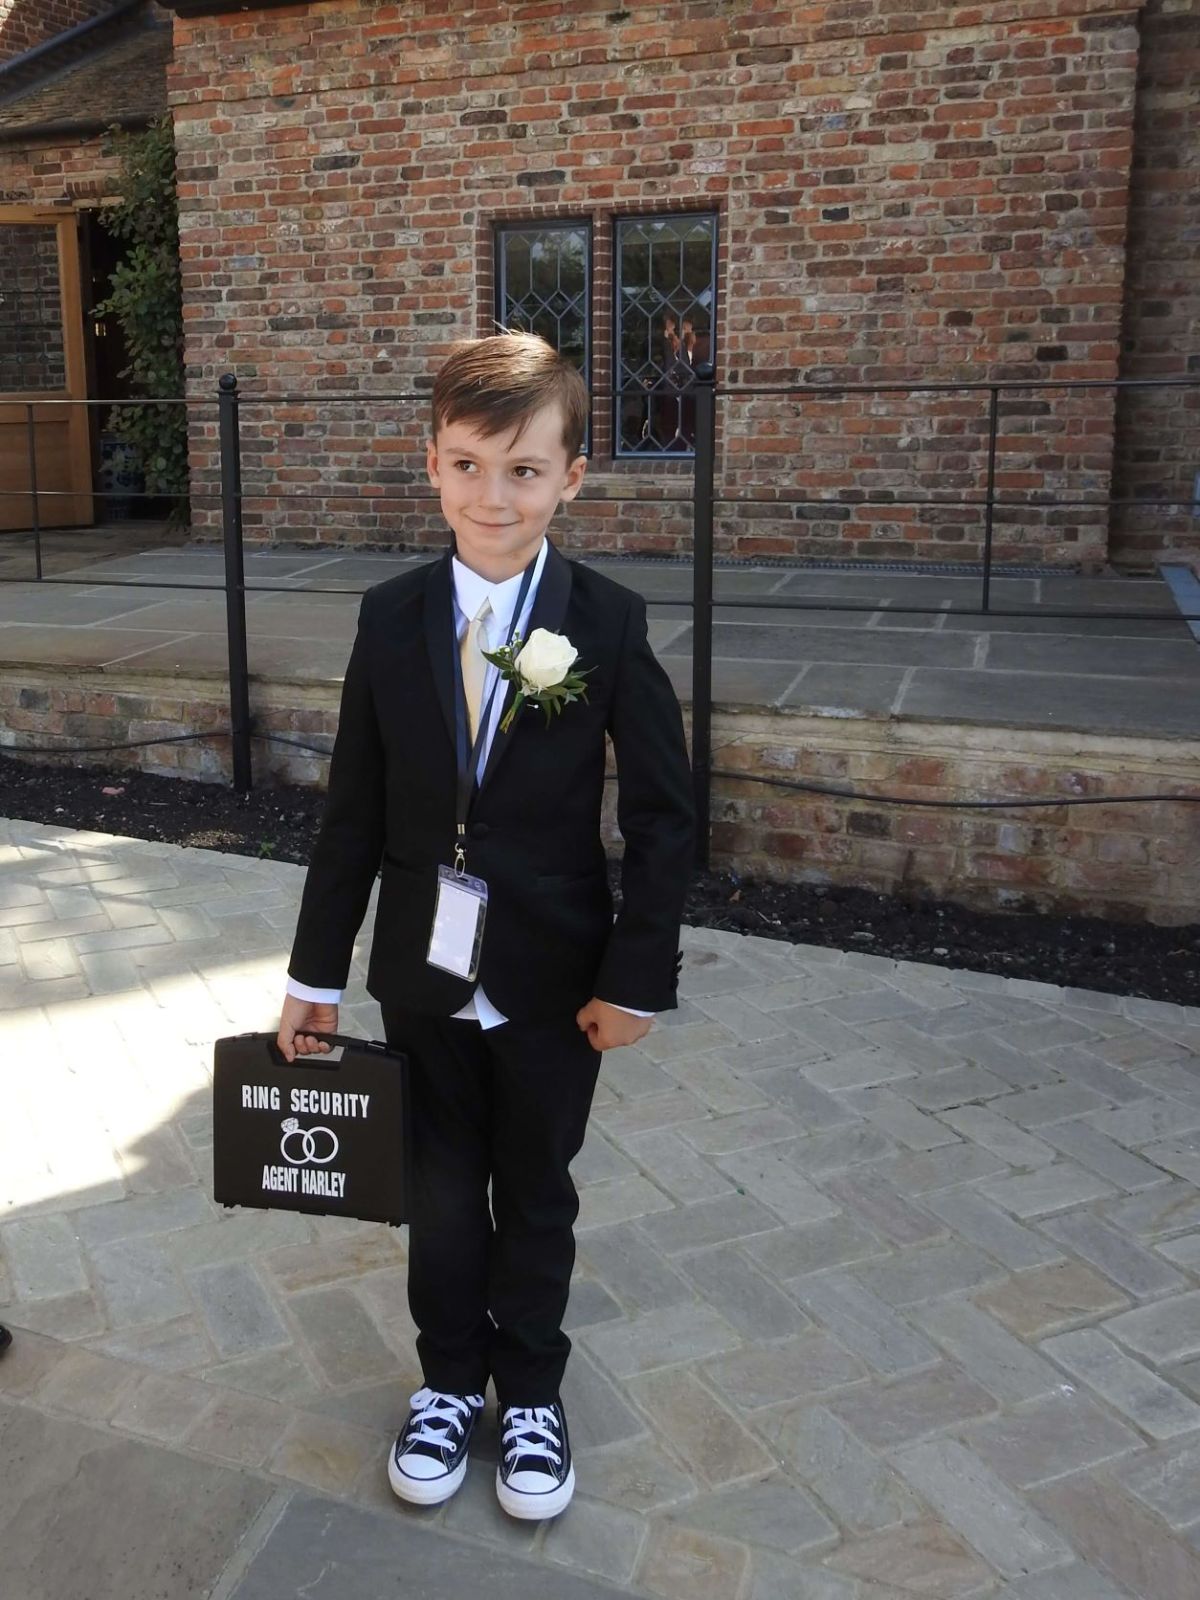 This young man, stole the show when he delivered the rings in the ceremony in his security case 